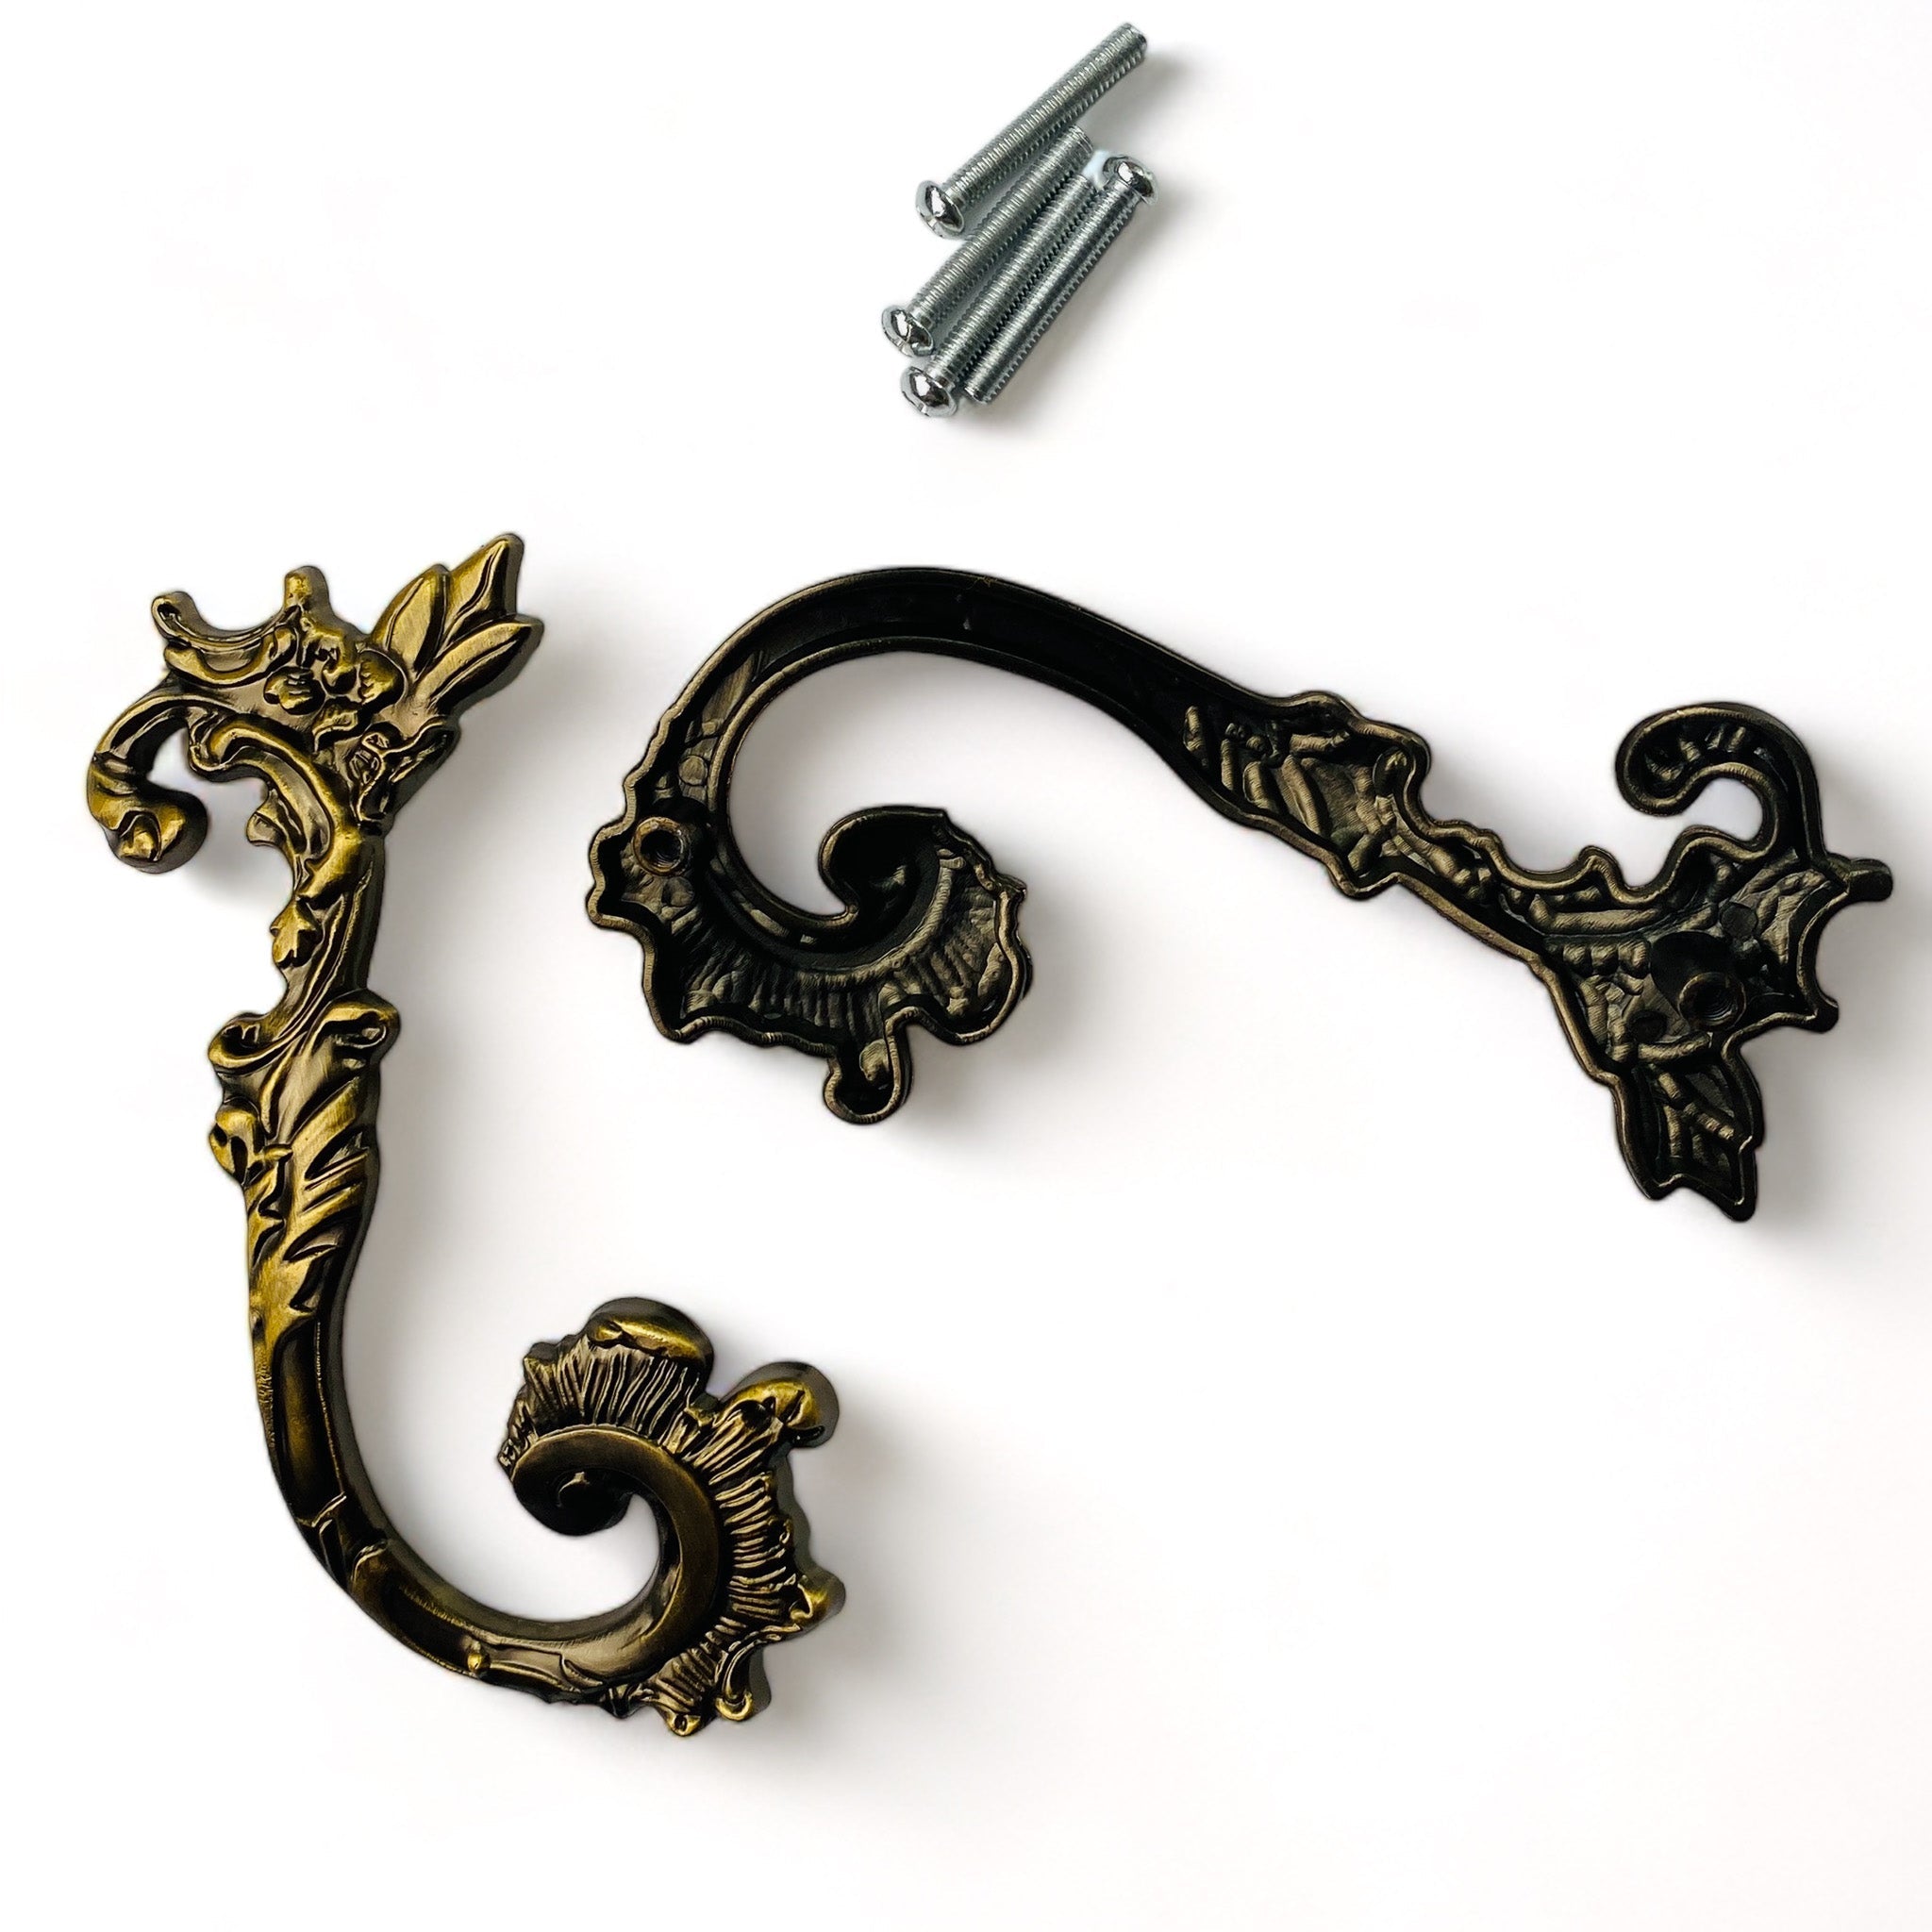 Two metal drawer pulls and 4 screws featuring swirling flourished and floral details are against a white background.